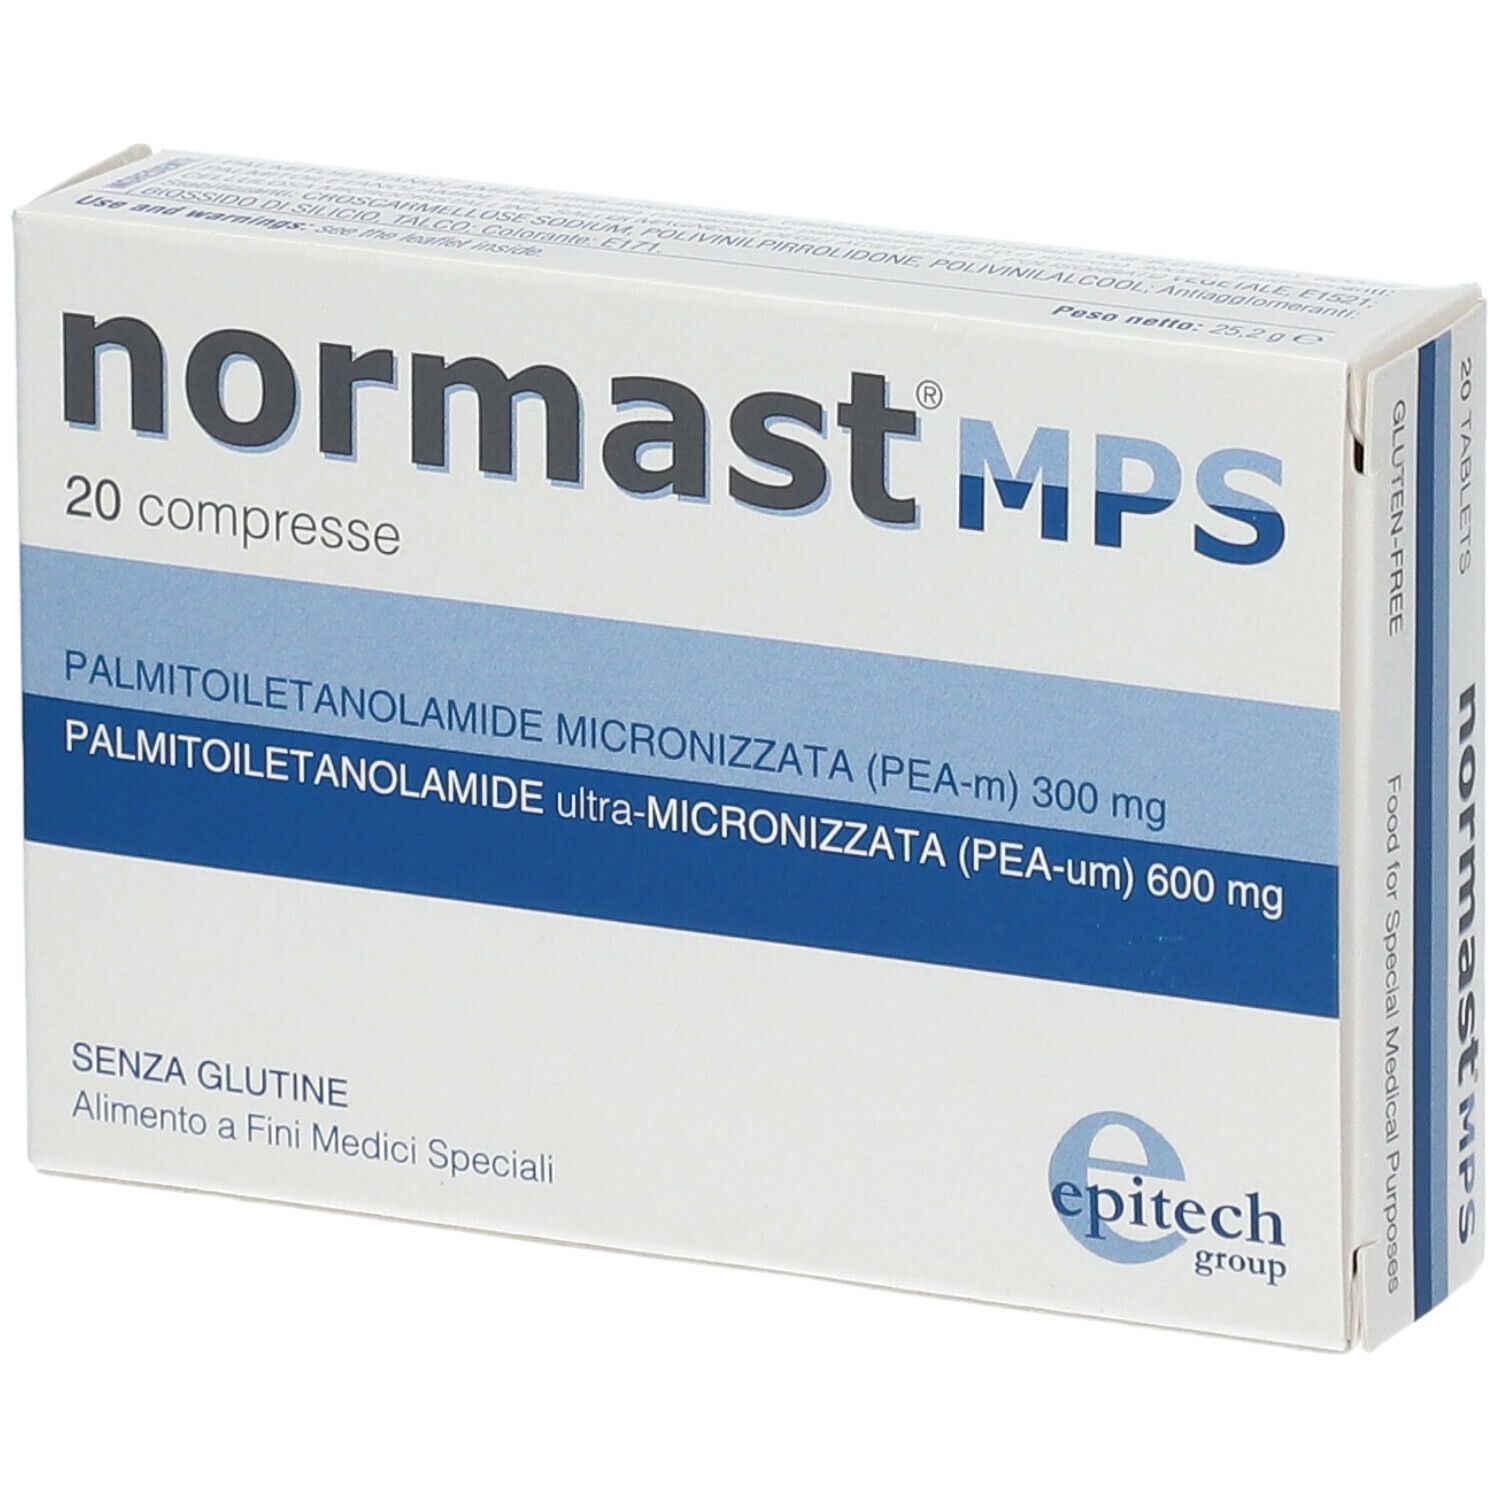 Image of Normast® MPS